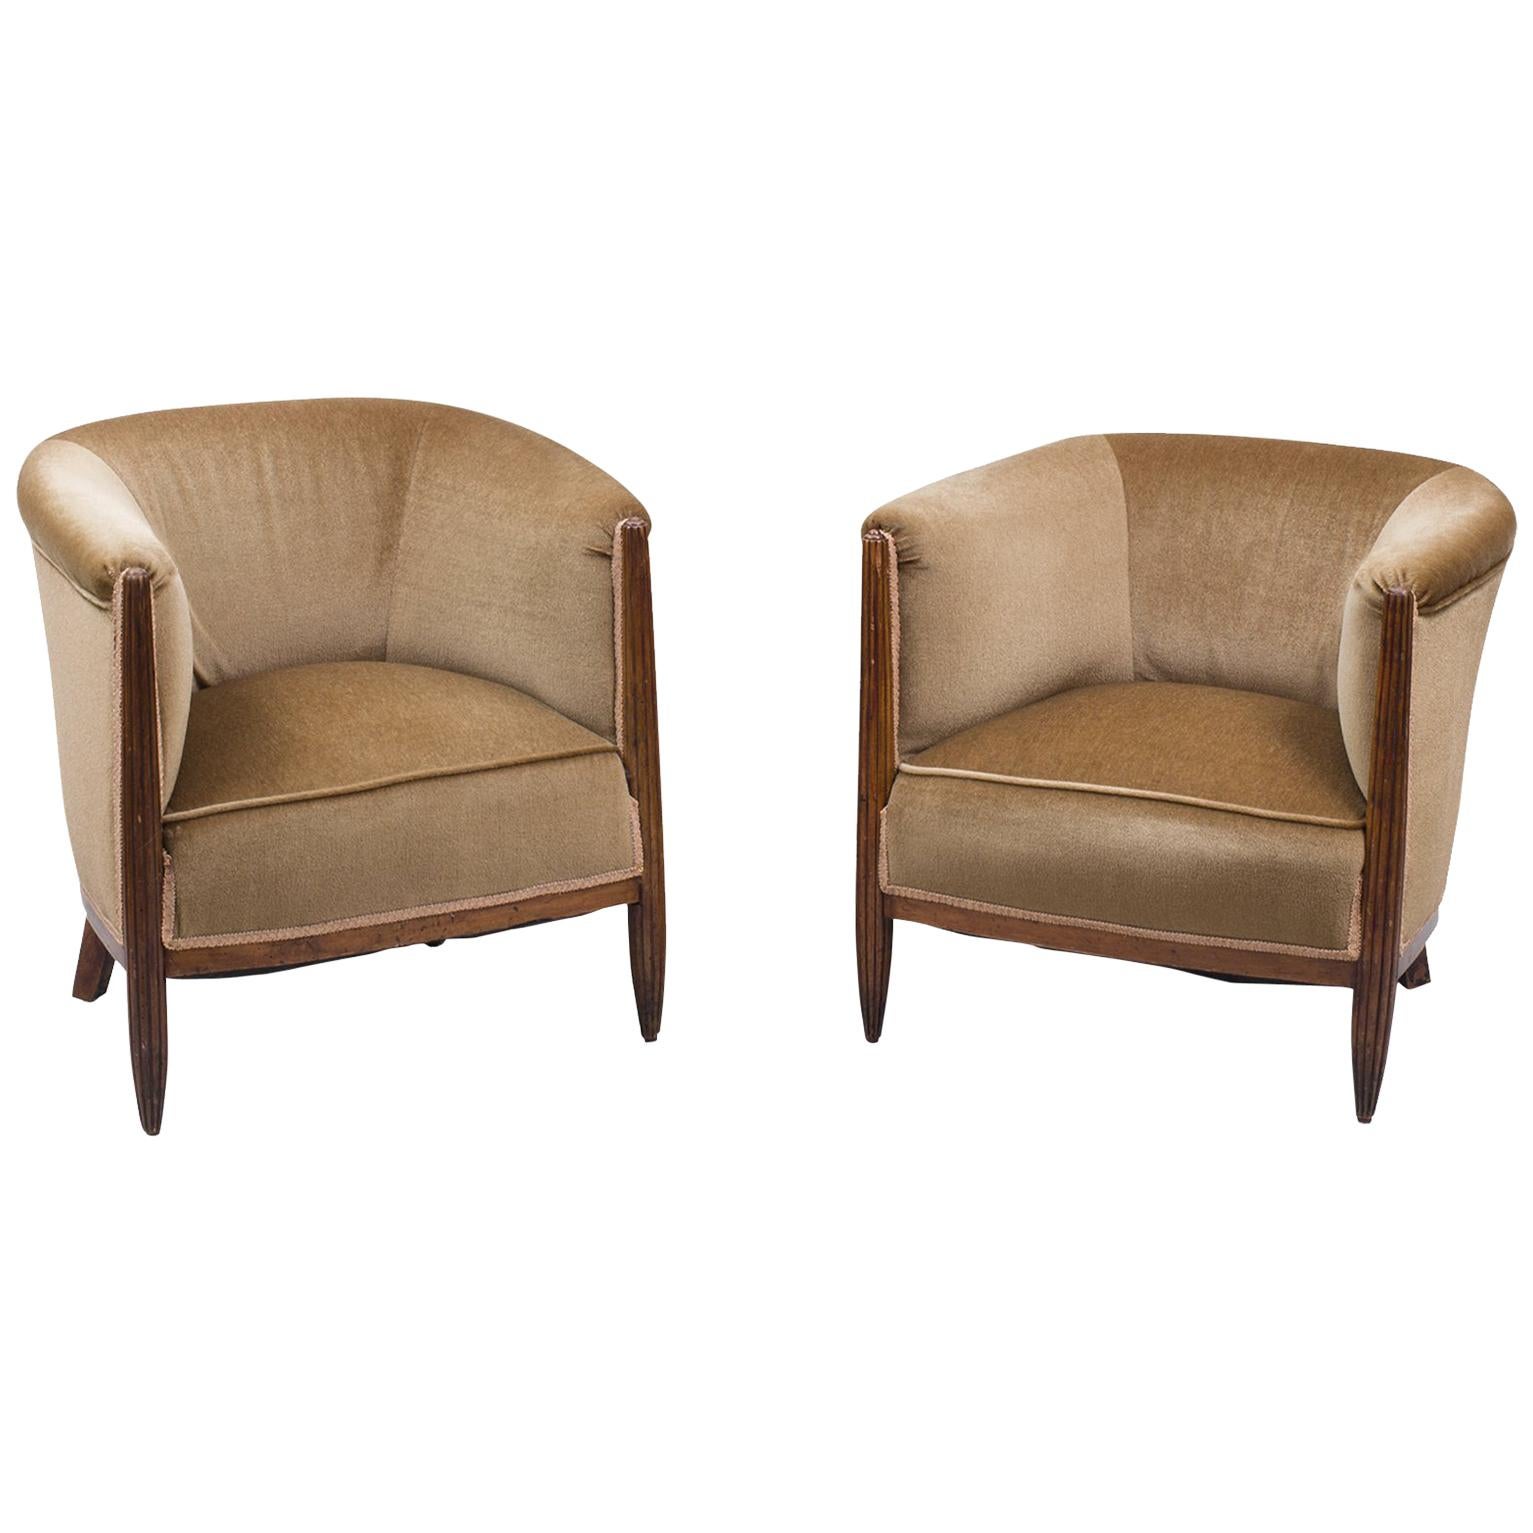 Set of Two 1930s Art Deco Near-Pair of Mahogany Club Chairs